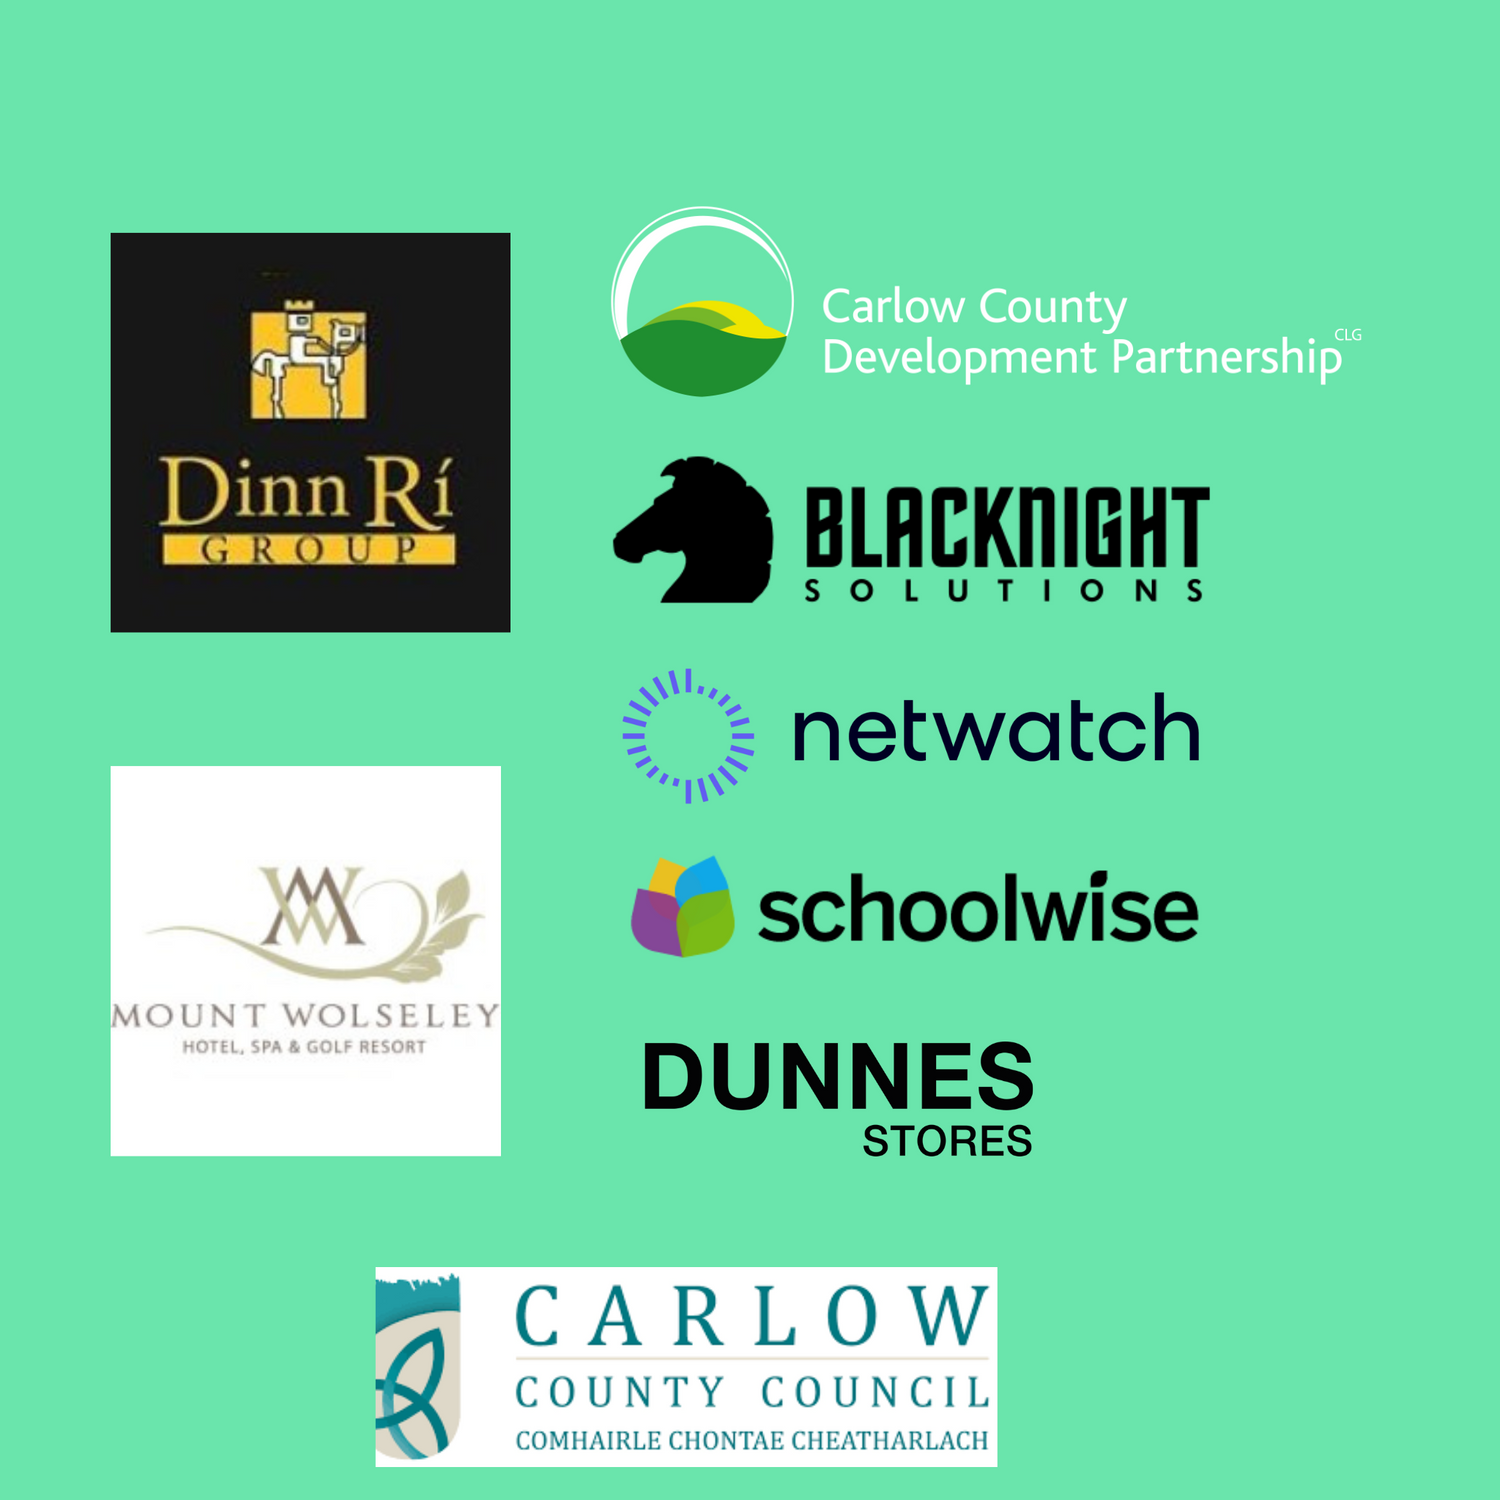 Logos for Dinn Ri Group Mount Wolsey Carlow County Development Partnership Blacknight Solutions Netwatch Schoolwise Dunnes Stores and Carlow County Council 